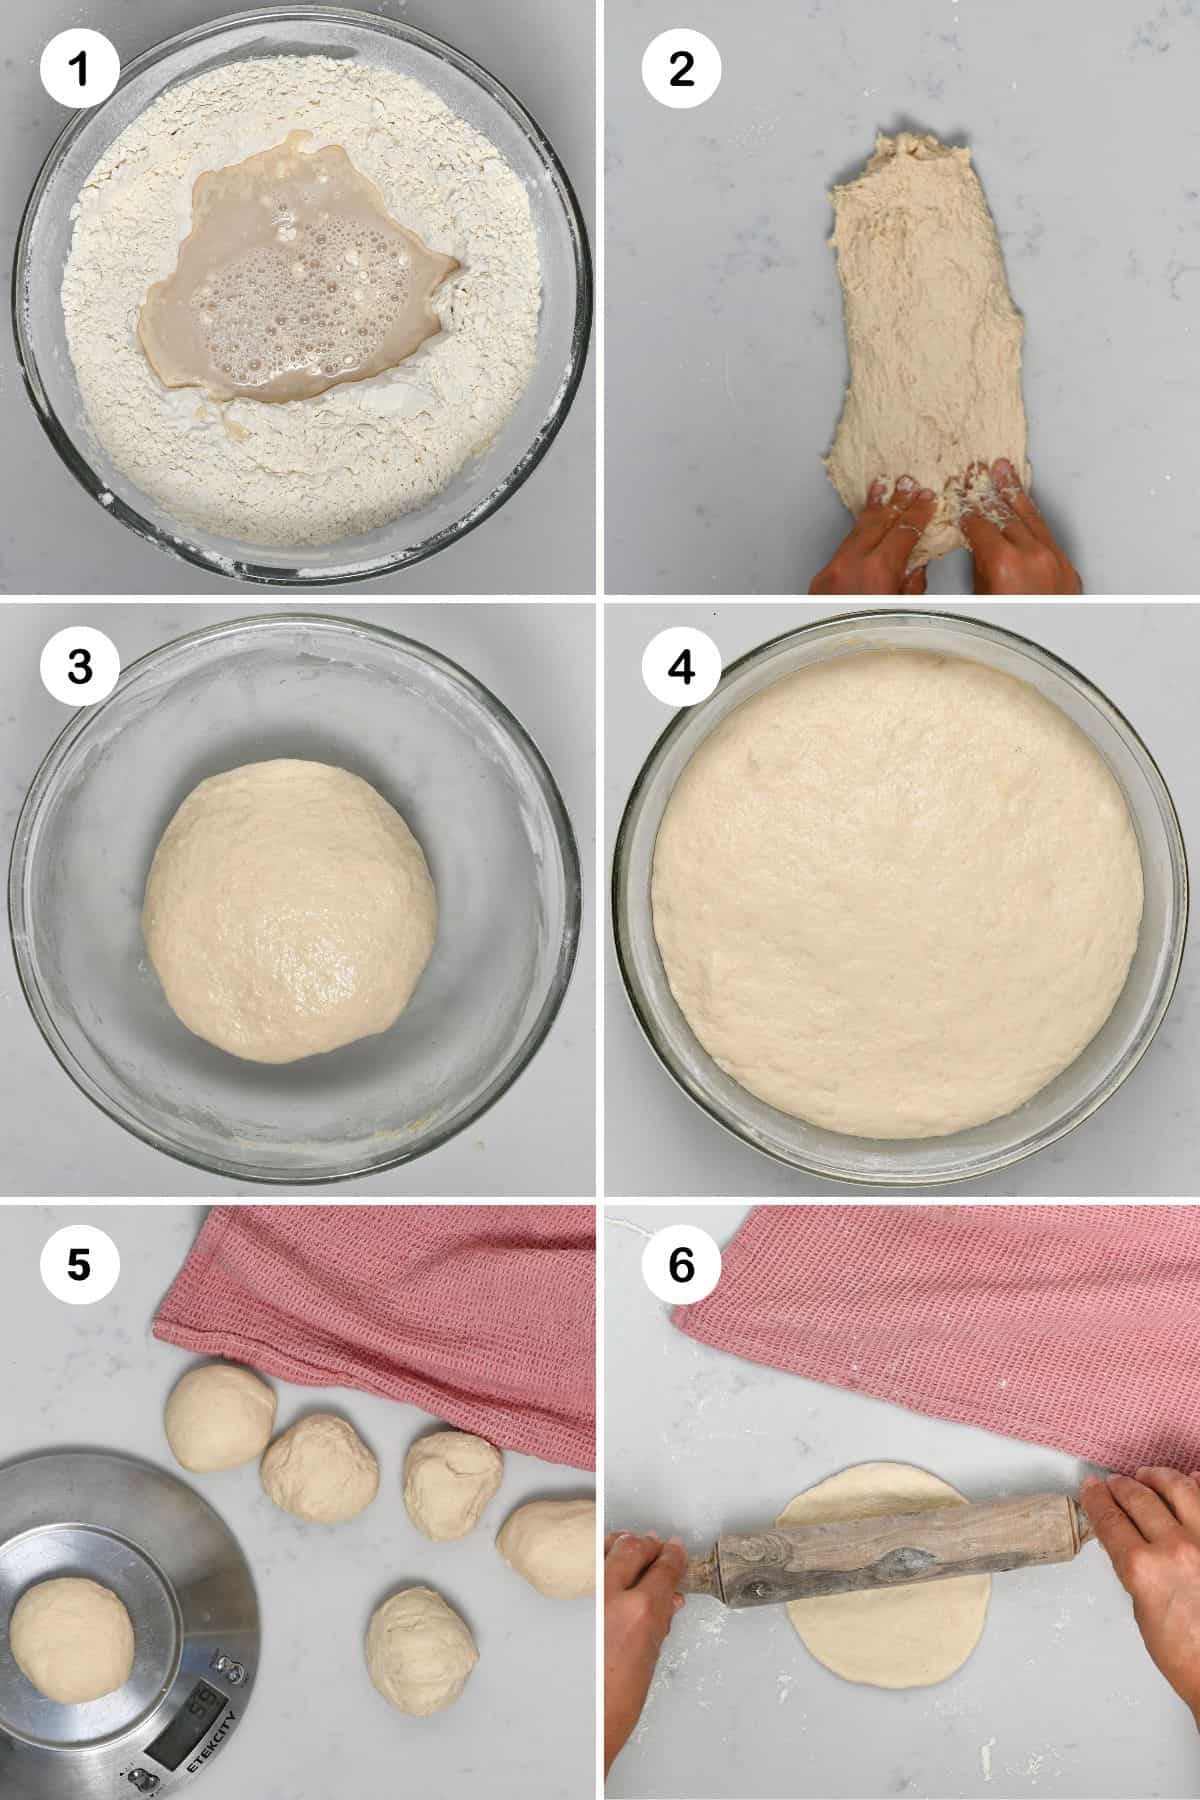 Steps for making dough for spinach pastries